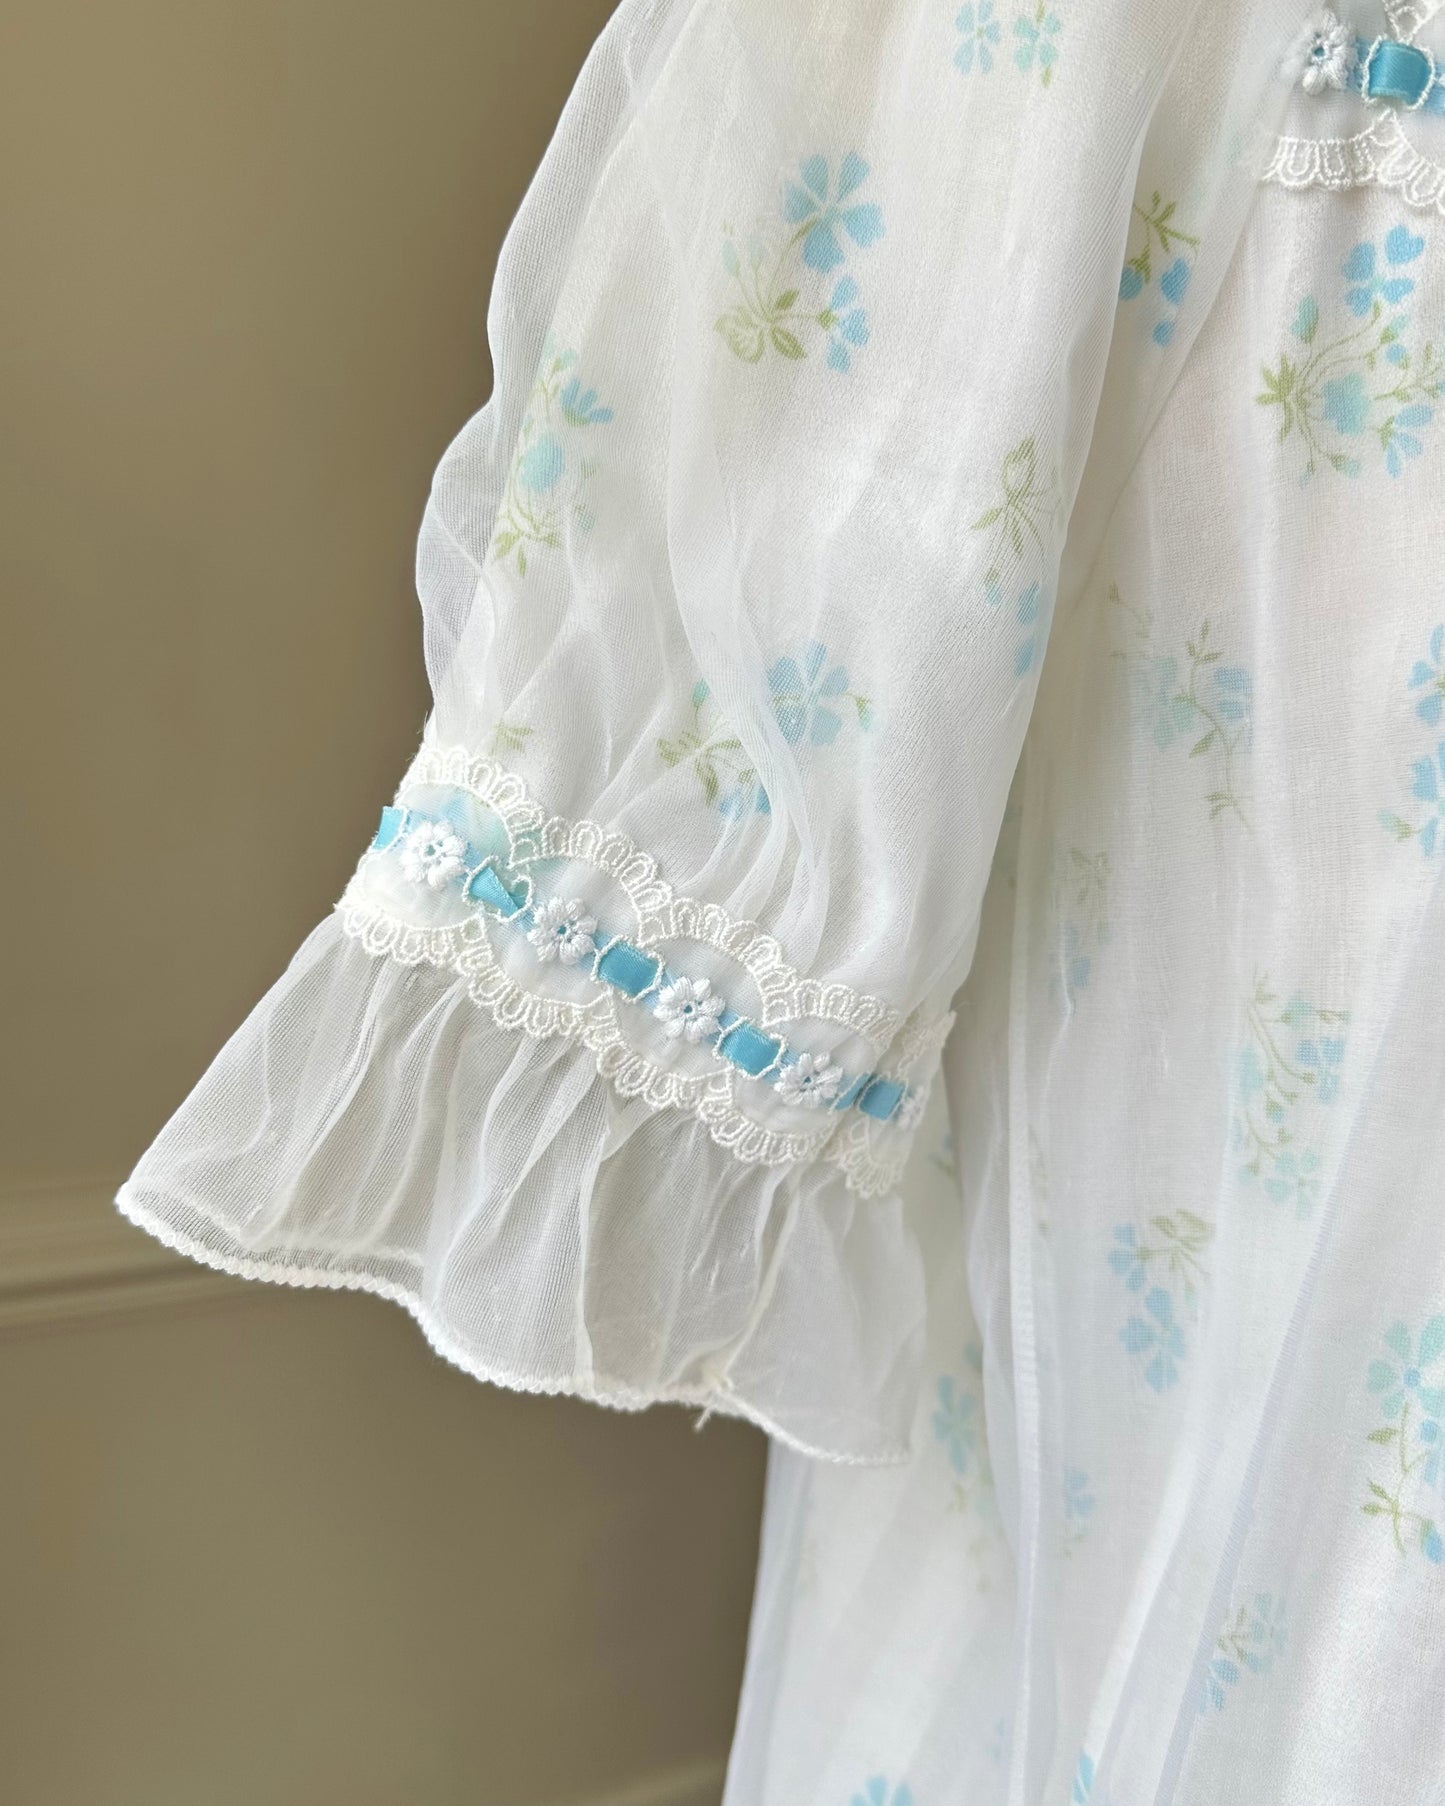 Soft Vintage-style Chiffon Dress featuring a Baby Blue Floral Print